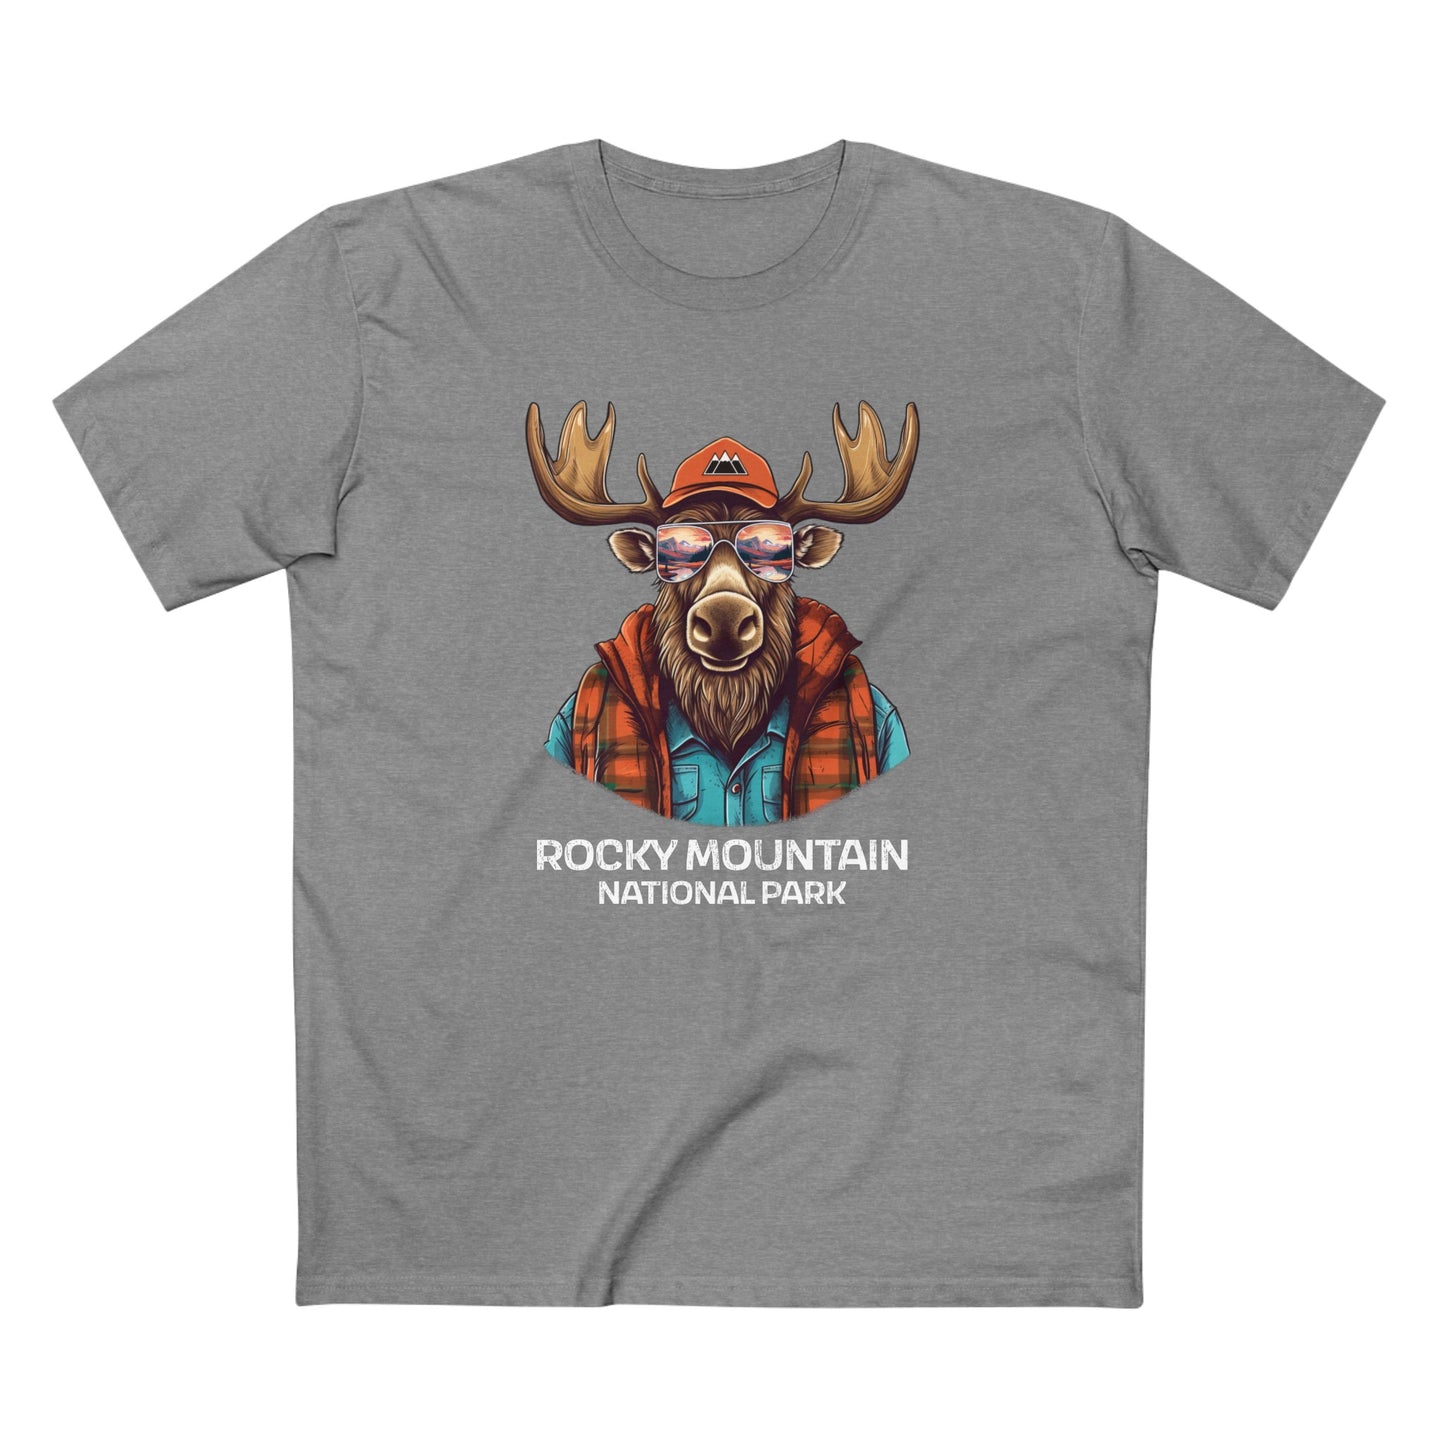 Rocky Mountain National Park T-Shirt - Cool Moose